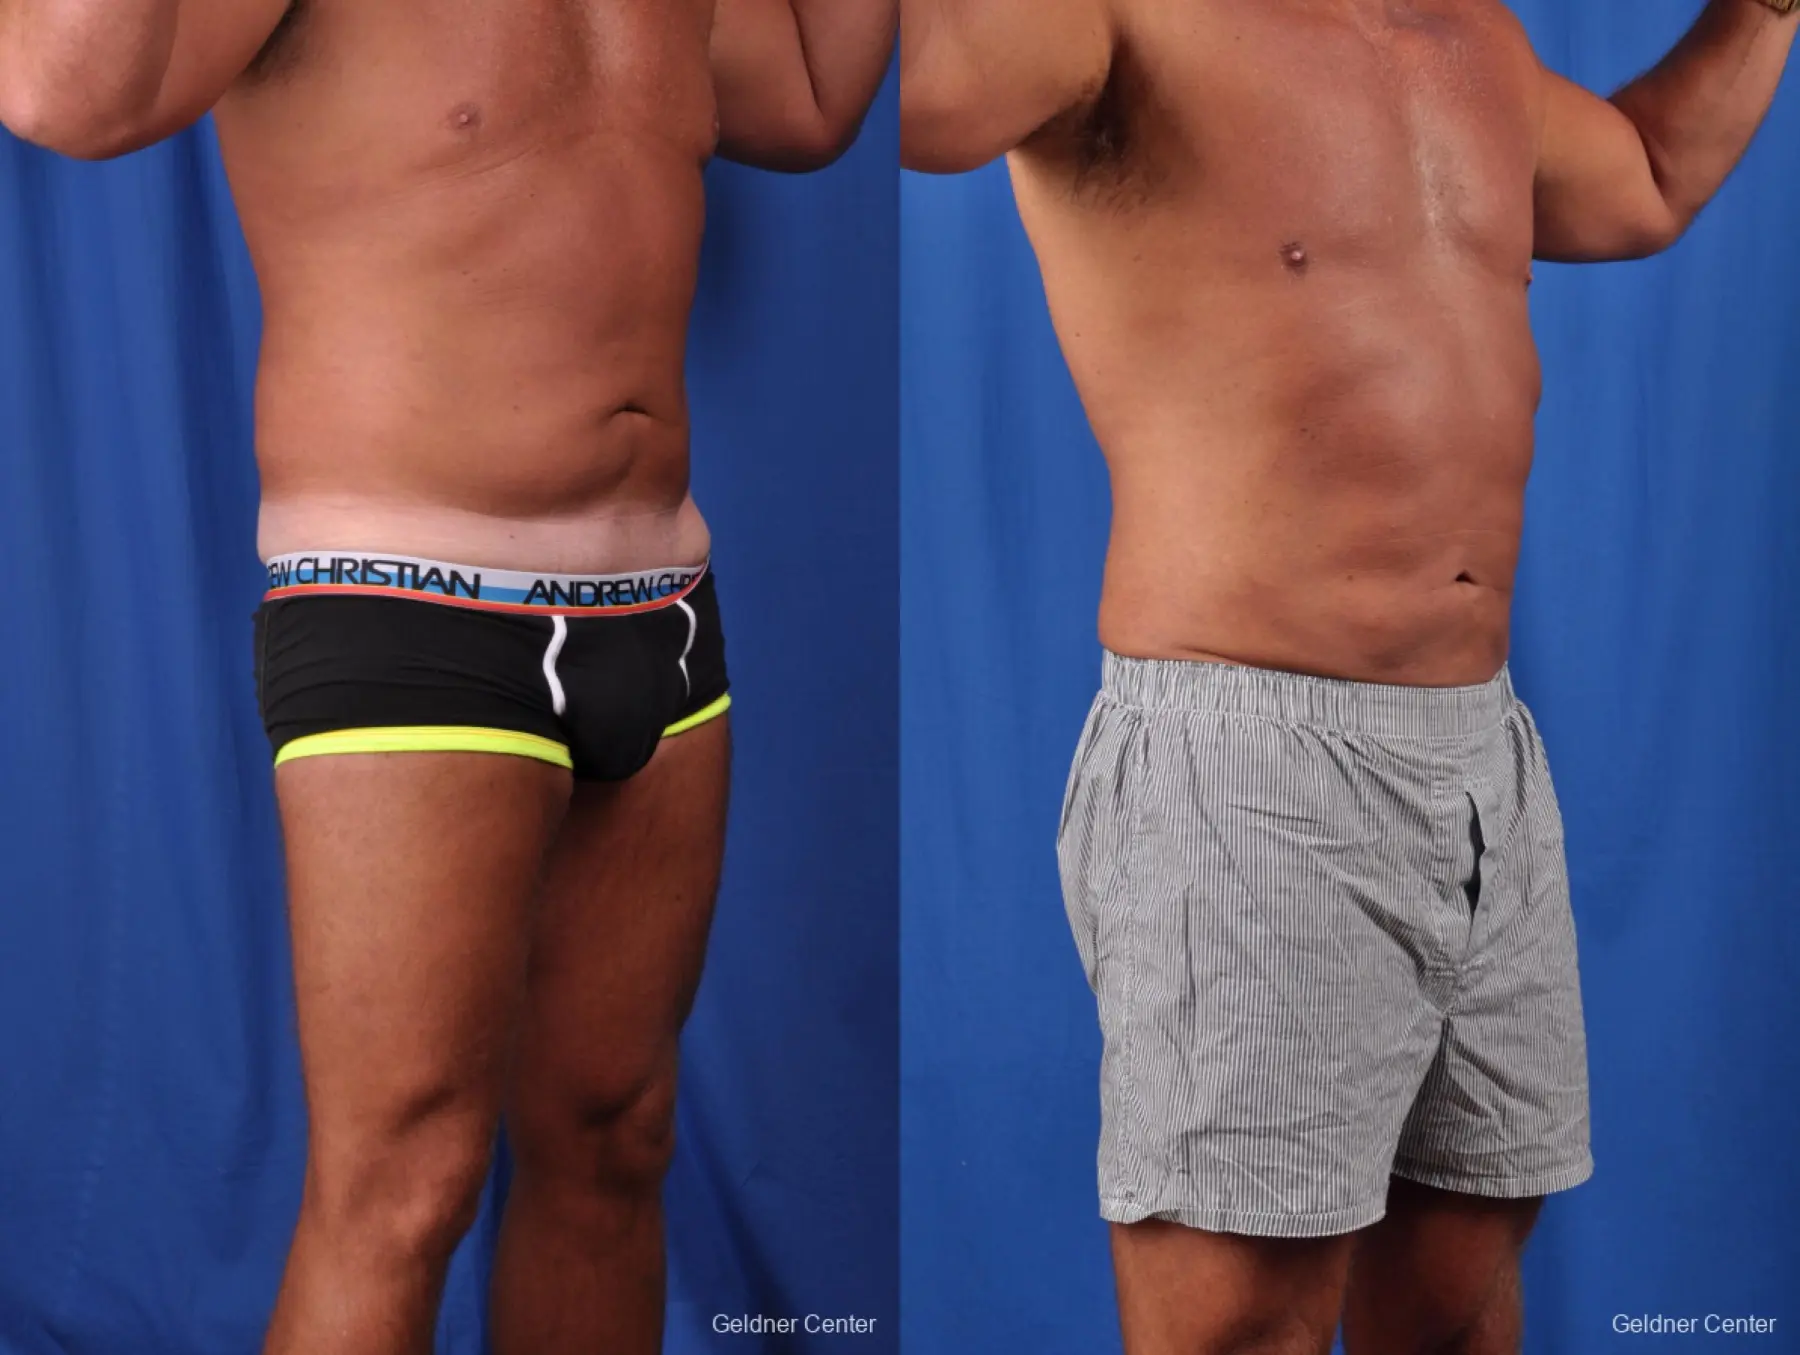 Liposuction For Men: Patient 5 - Before and After 2